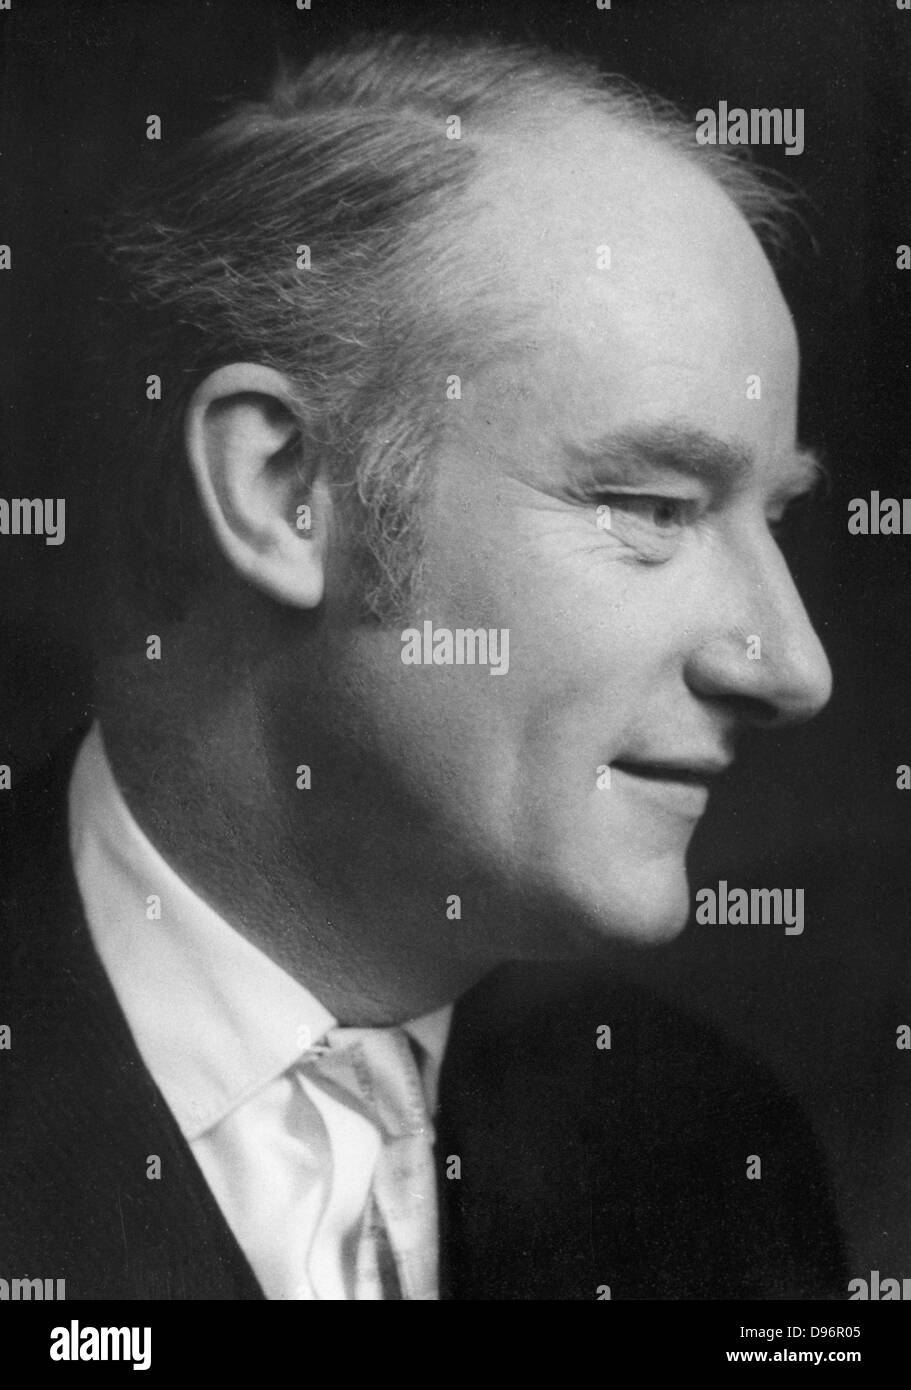 Francis Harry Compton Crick (1916-2004), British microbiologist.  Crick discovered the molecular structure of DNA.  He shared the 1962 Nobel prize for physiology or medicine with James Dewey Watson and Maurice Wilkinson. The citation read 'for further discoveries concerning the molecular structure of nucleic acids and their significance for information transfer in living materials'. Stock Photo